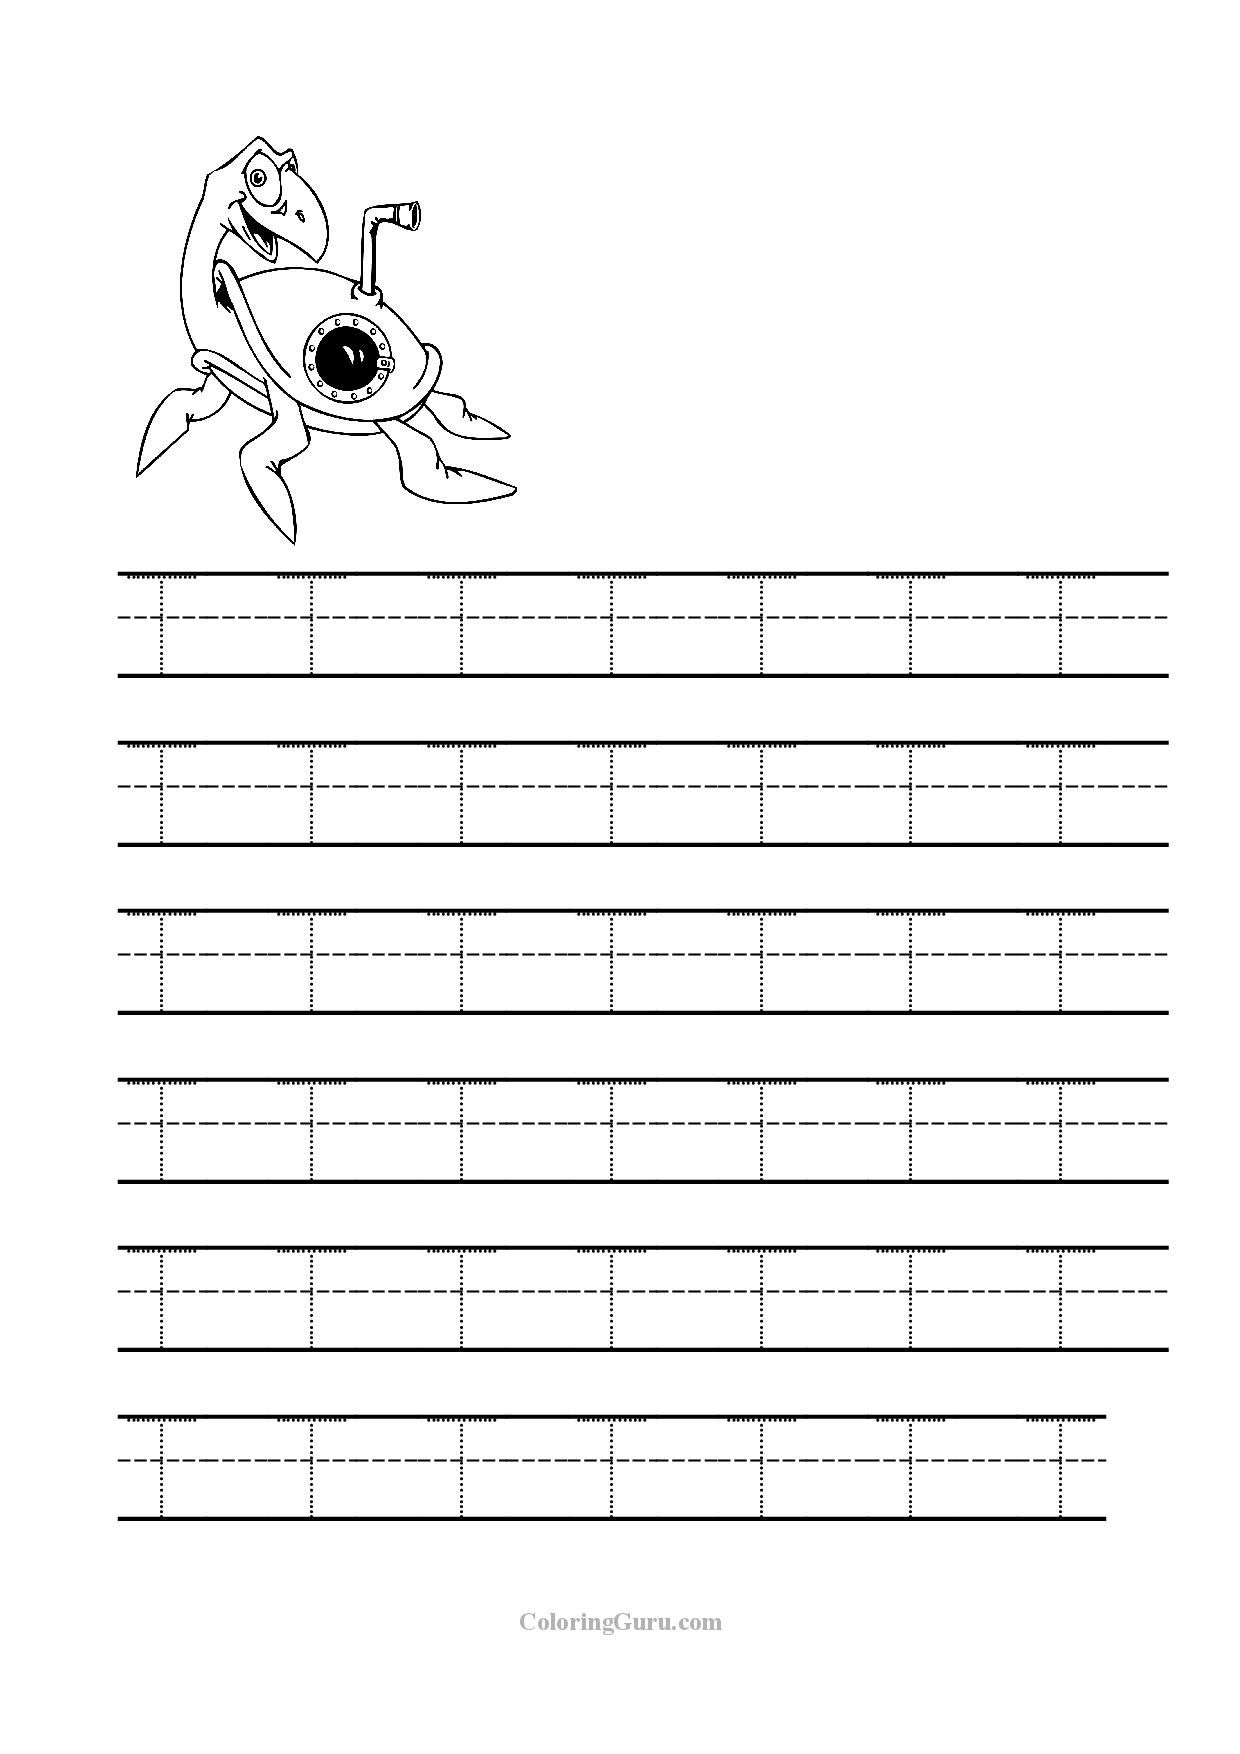 Free Printable Tracing Letter T Worksheets For Preschool inside Letter T Tracing Worksheets Preschool